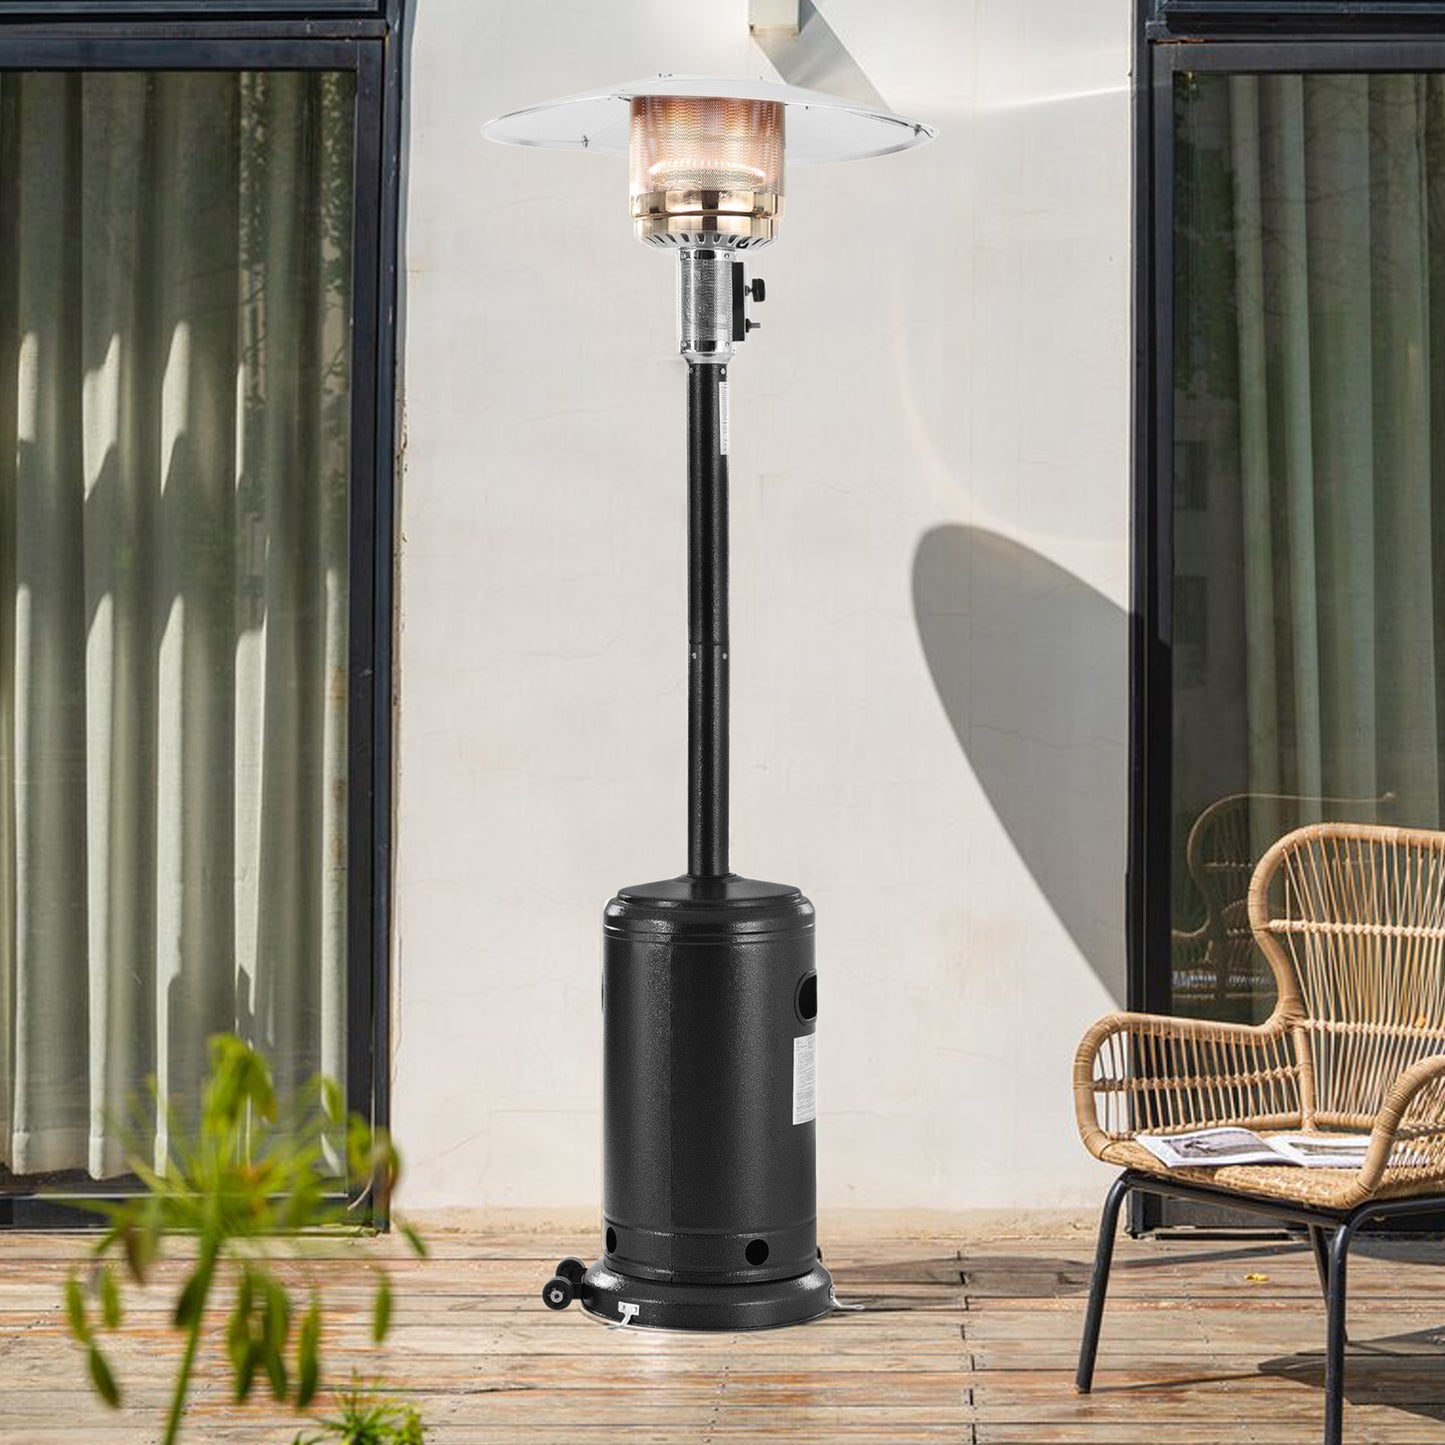 Outdoor Heaters for Patios, 48000BTU Propane Patio Heater with Wheels Safe Auto Shut Off Device for Commercial & Residential, Black, LJ2744